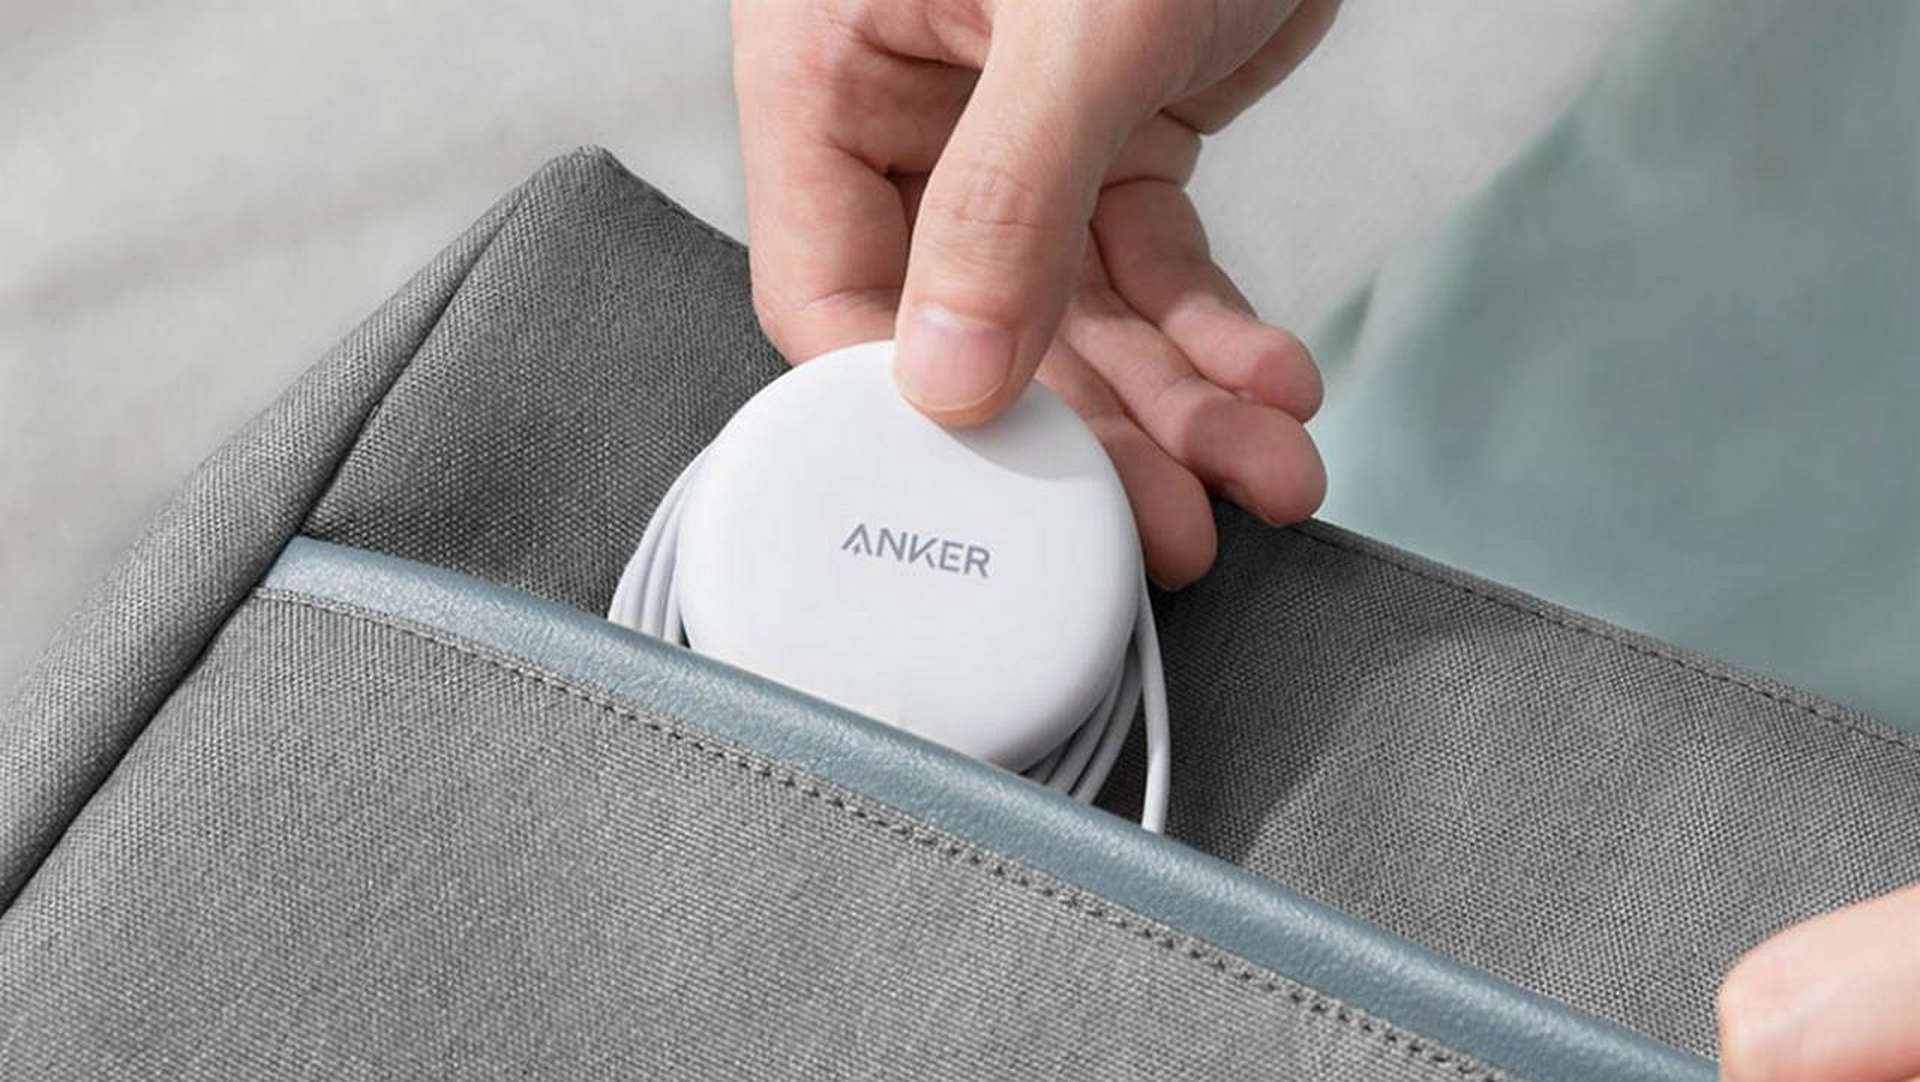 Anker magsafe. Кольцо Anker MAGSAFE. MAGSAFE Anker car. Чехол Hoco MAGSAFE. Anker 533 Wireless Charger package.